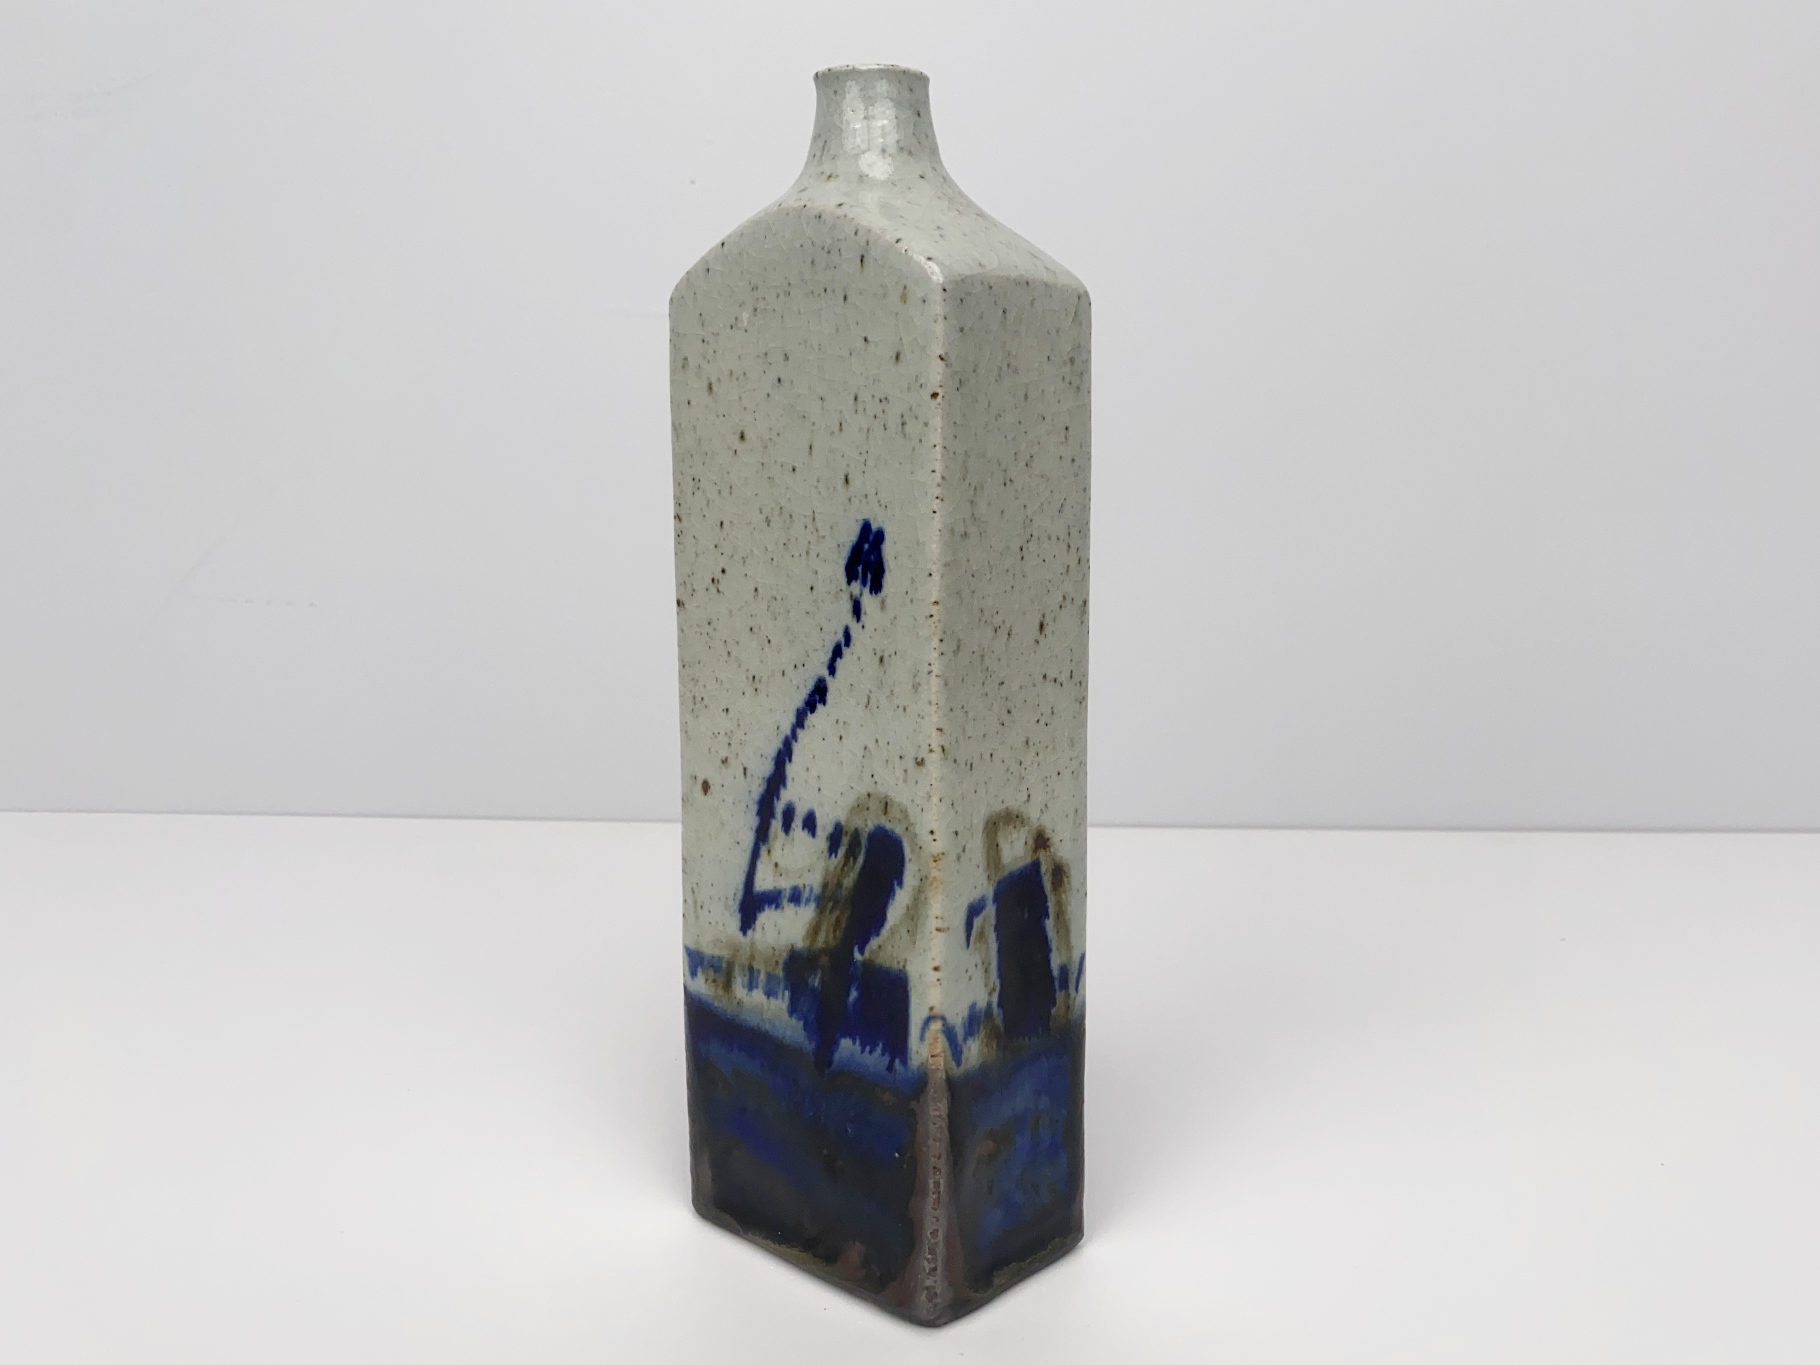 Vase, Ceramic, Stoneware, Unique Piece, abstract Painting and glazed, by Wilhelm & Elly Kuch, 1980s